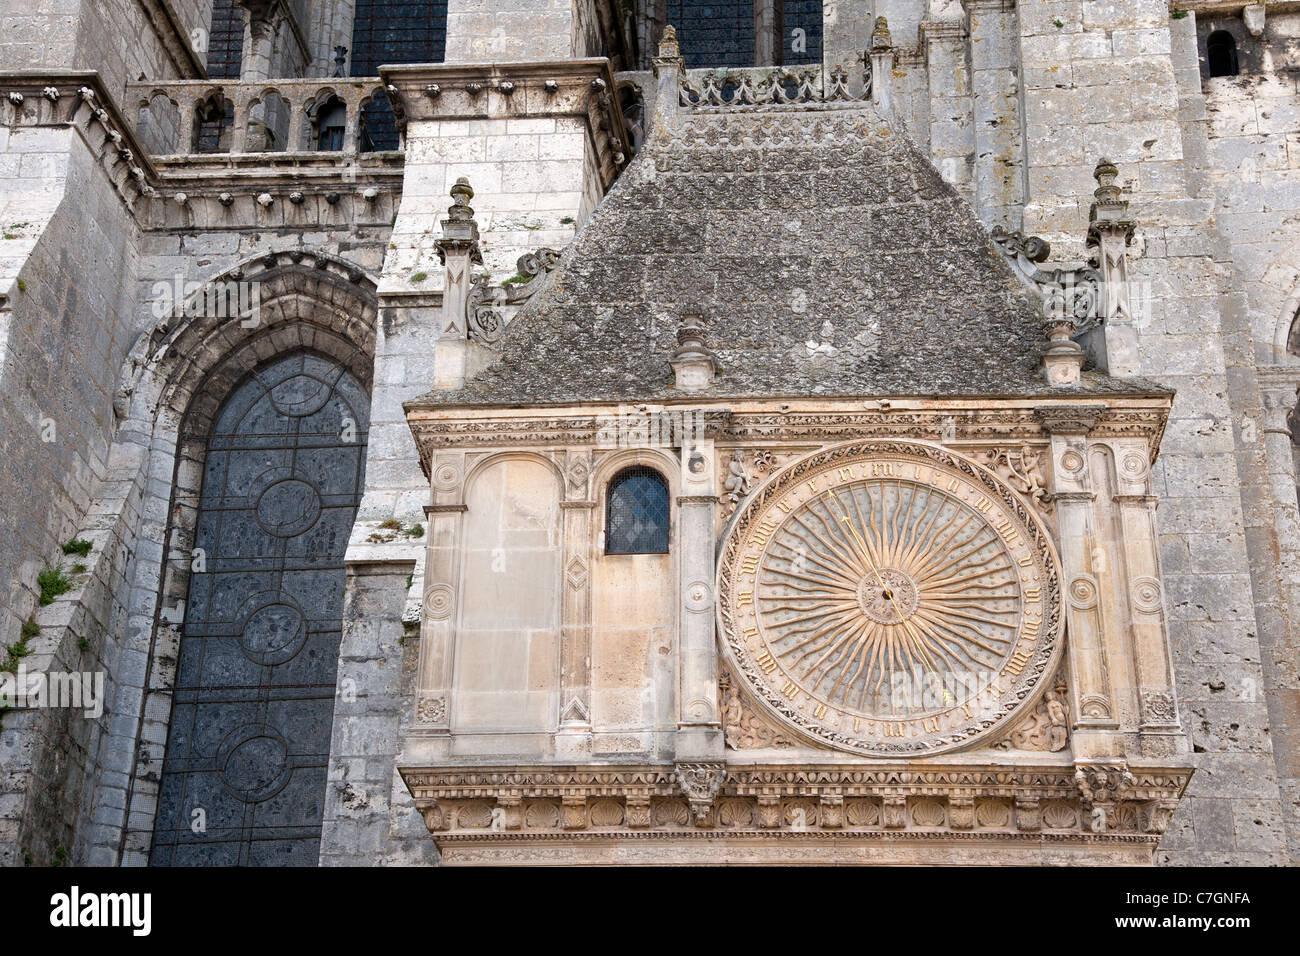 Ancient astronomical clock on the facade of famous Chartres cathedral, France Stock Photo